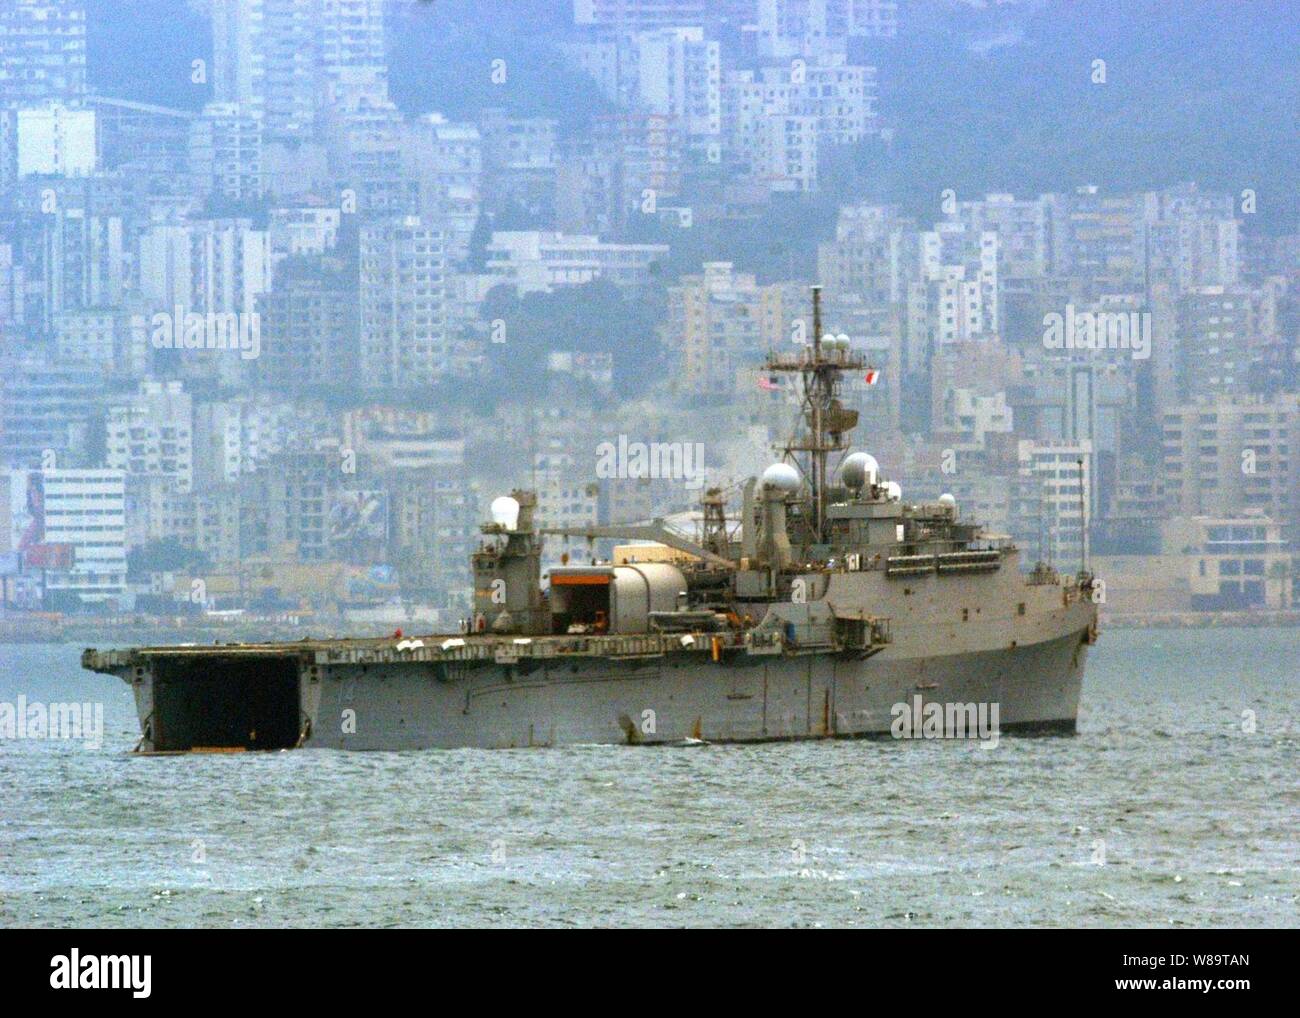 The USS Nashville (LPD 13) rides at anchor just off the coastline of Beirut, Lebanon, on July 21, 2006.  At the request of the U.S. Ambassador to Lebanon and at the direction of the Secretary of Defense, the United States Central Command and elements of Task Force 59 are assisting with the departure of U.S. citizens from Lebanon.  The Nashville is an amphibious transport which is used to carry and land Marines, their equipment and supplies by embarked air cushion or conventional landing craft, amphibious vehicles, helicopters or vertical take off and landing aircraft. Stock Photo